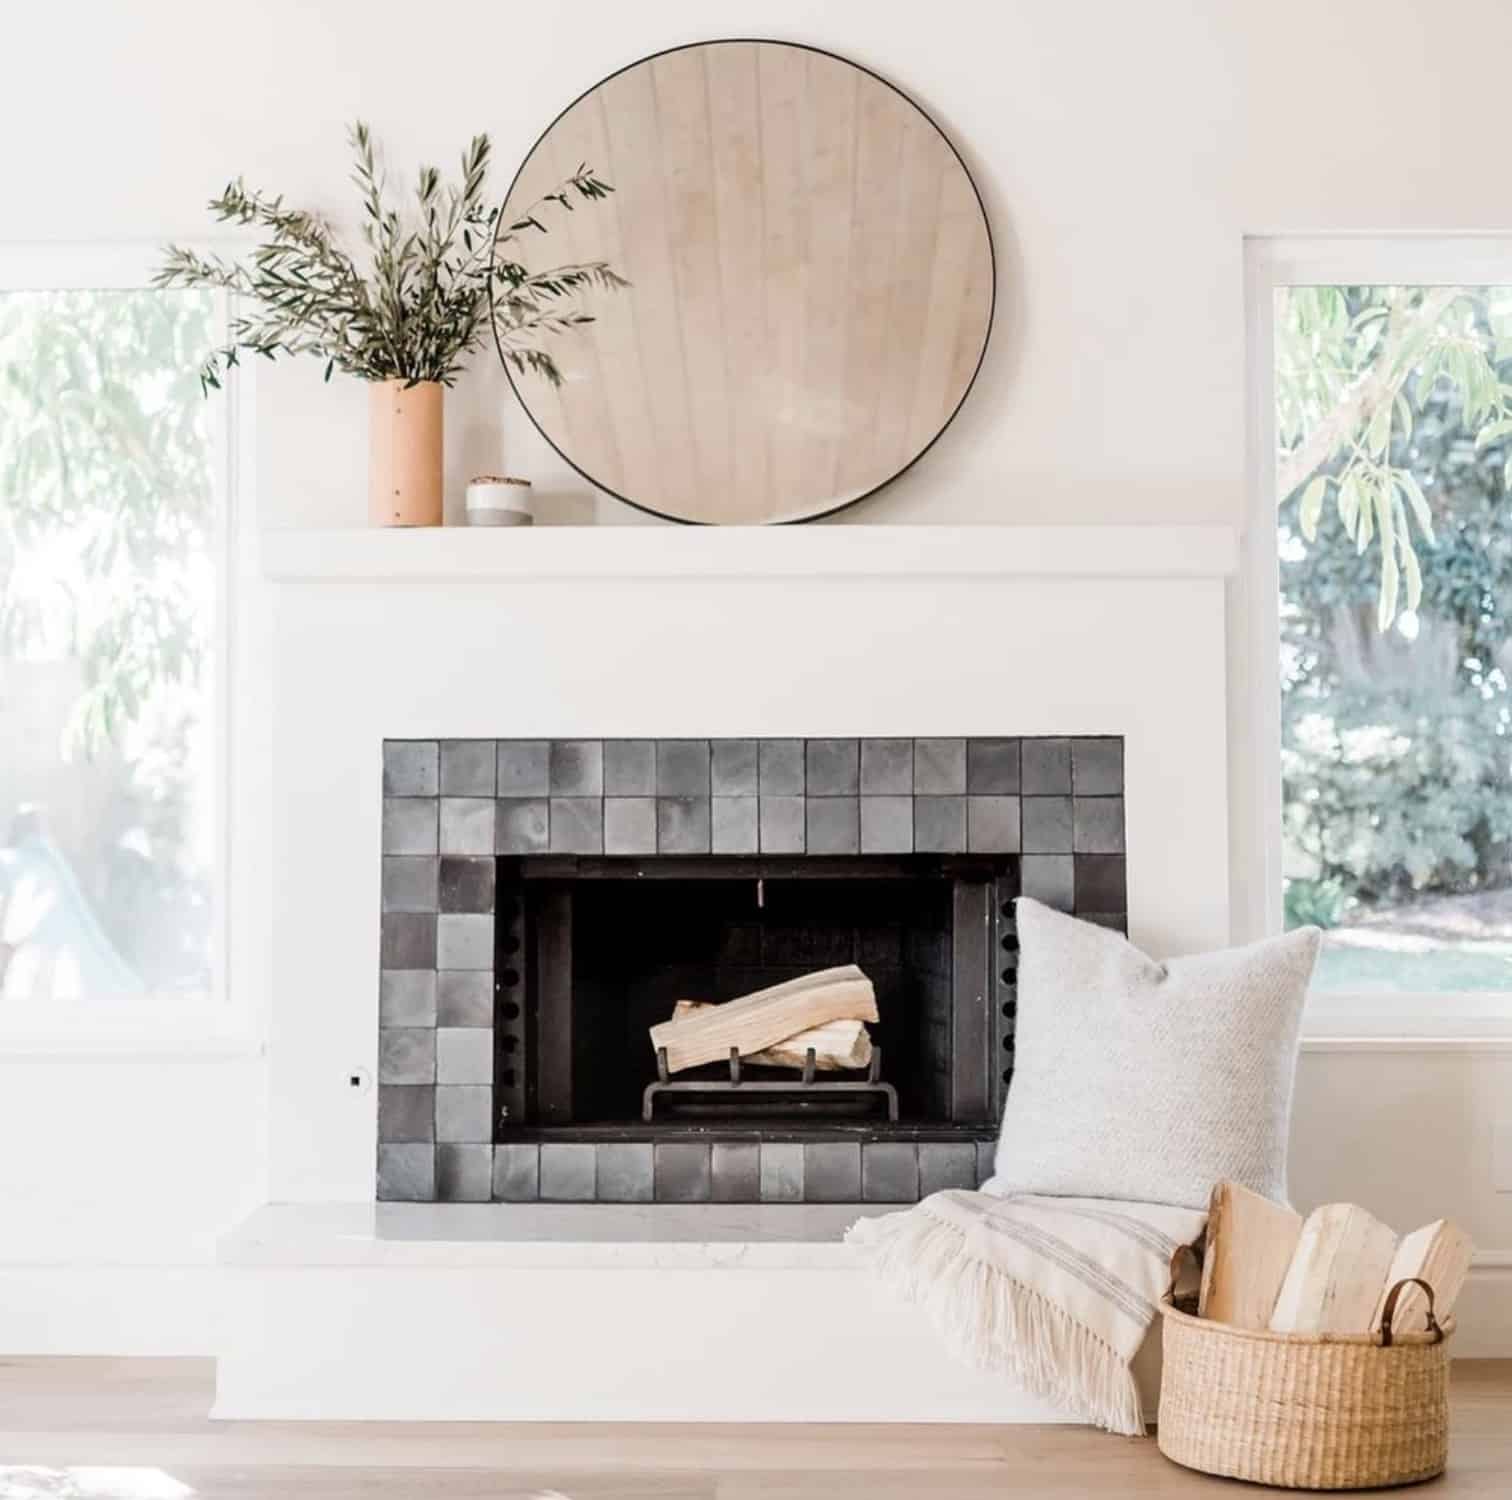 20 Easy Fireplace Tile Ideas To Remodel, Modern Fireplace Tile Surround Ideas